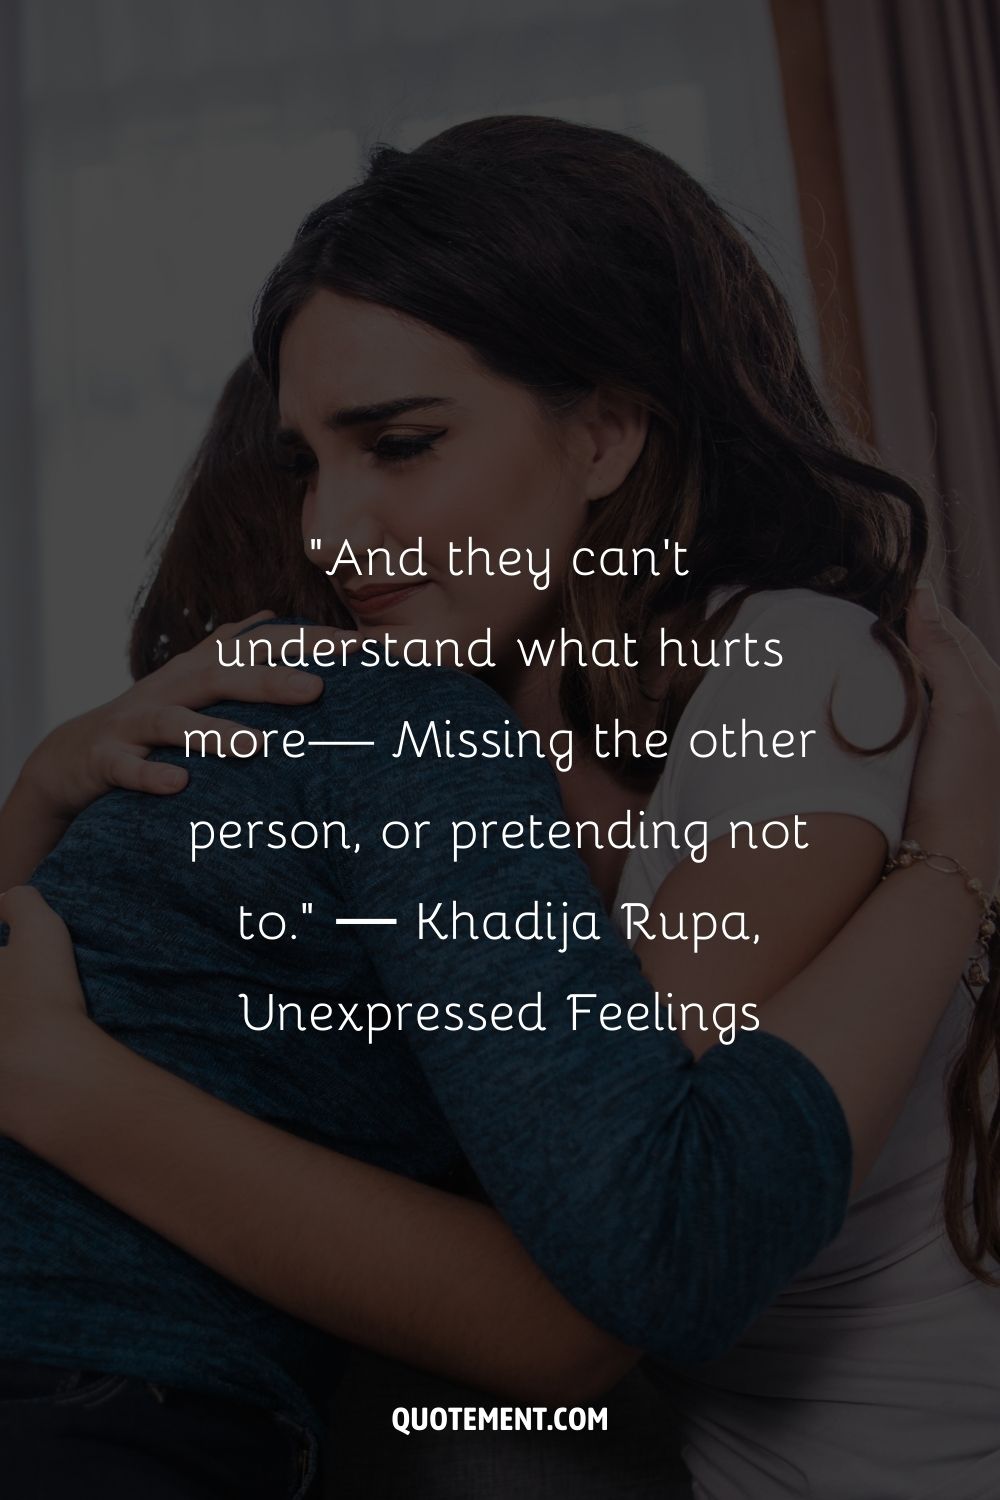 And they can’t understand what hurts more— Missing the other person, or pretending not to.